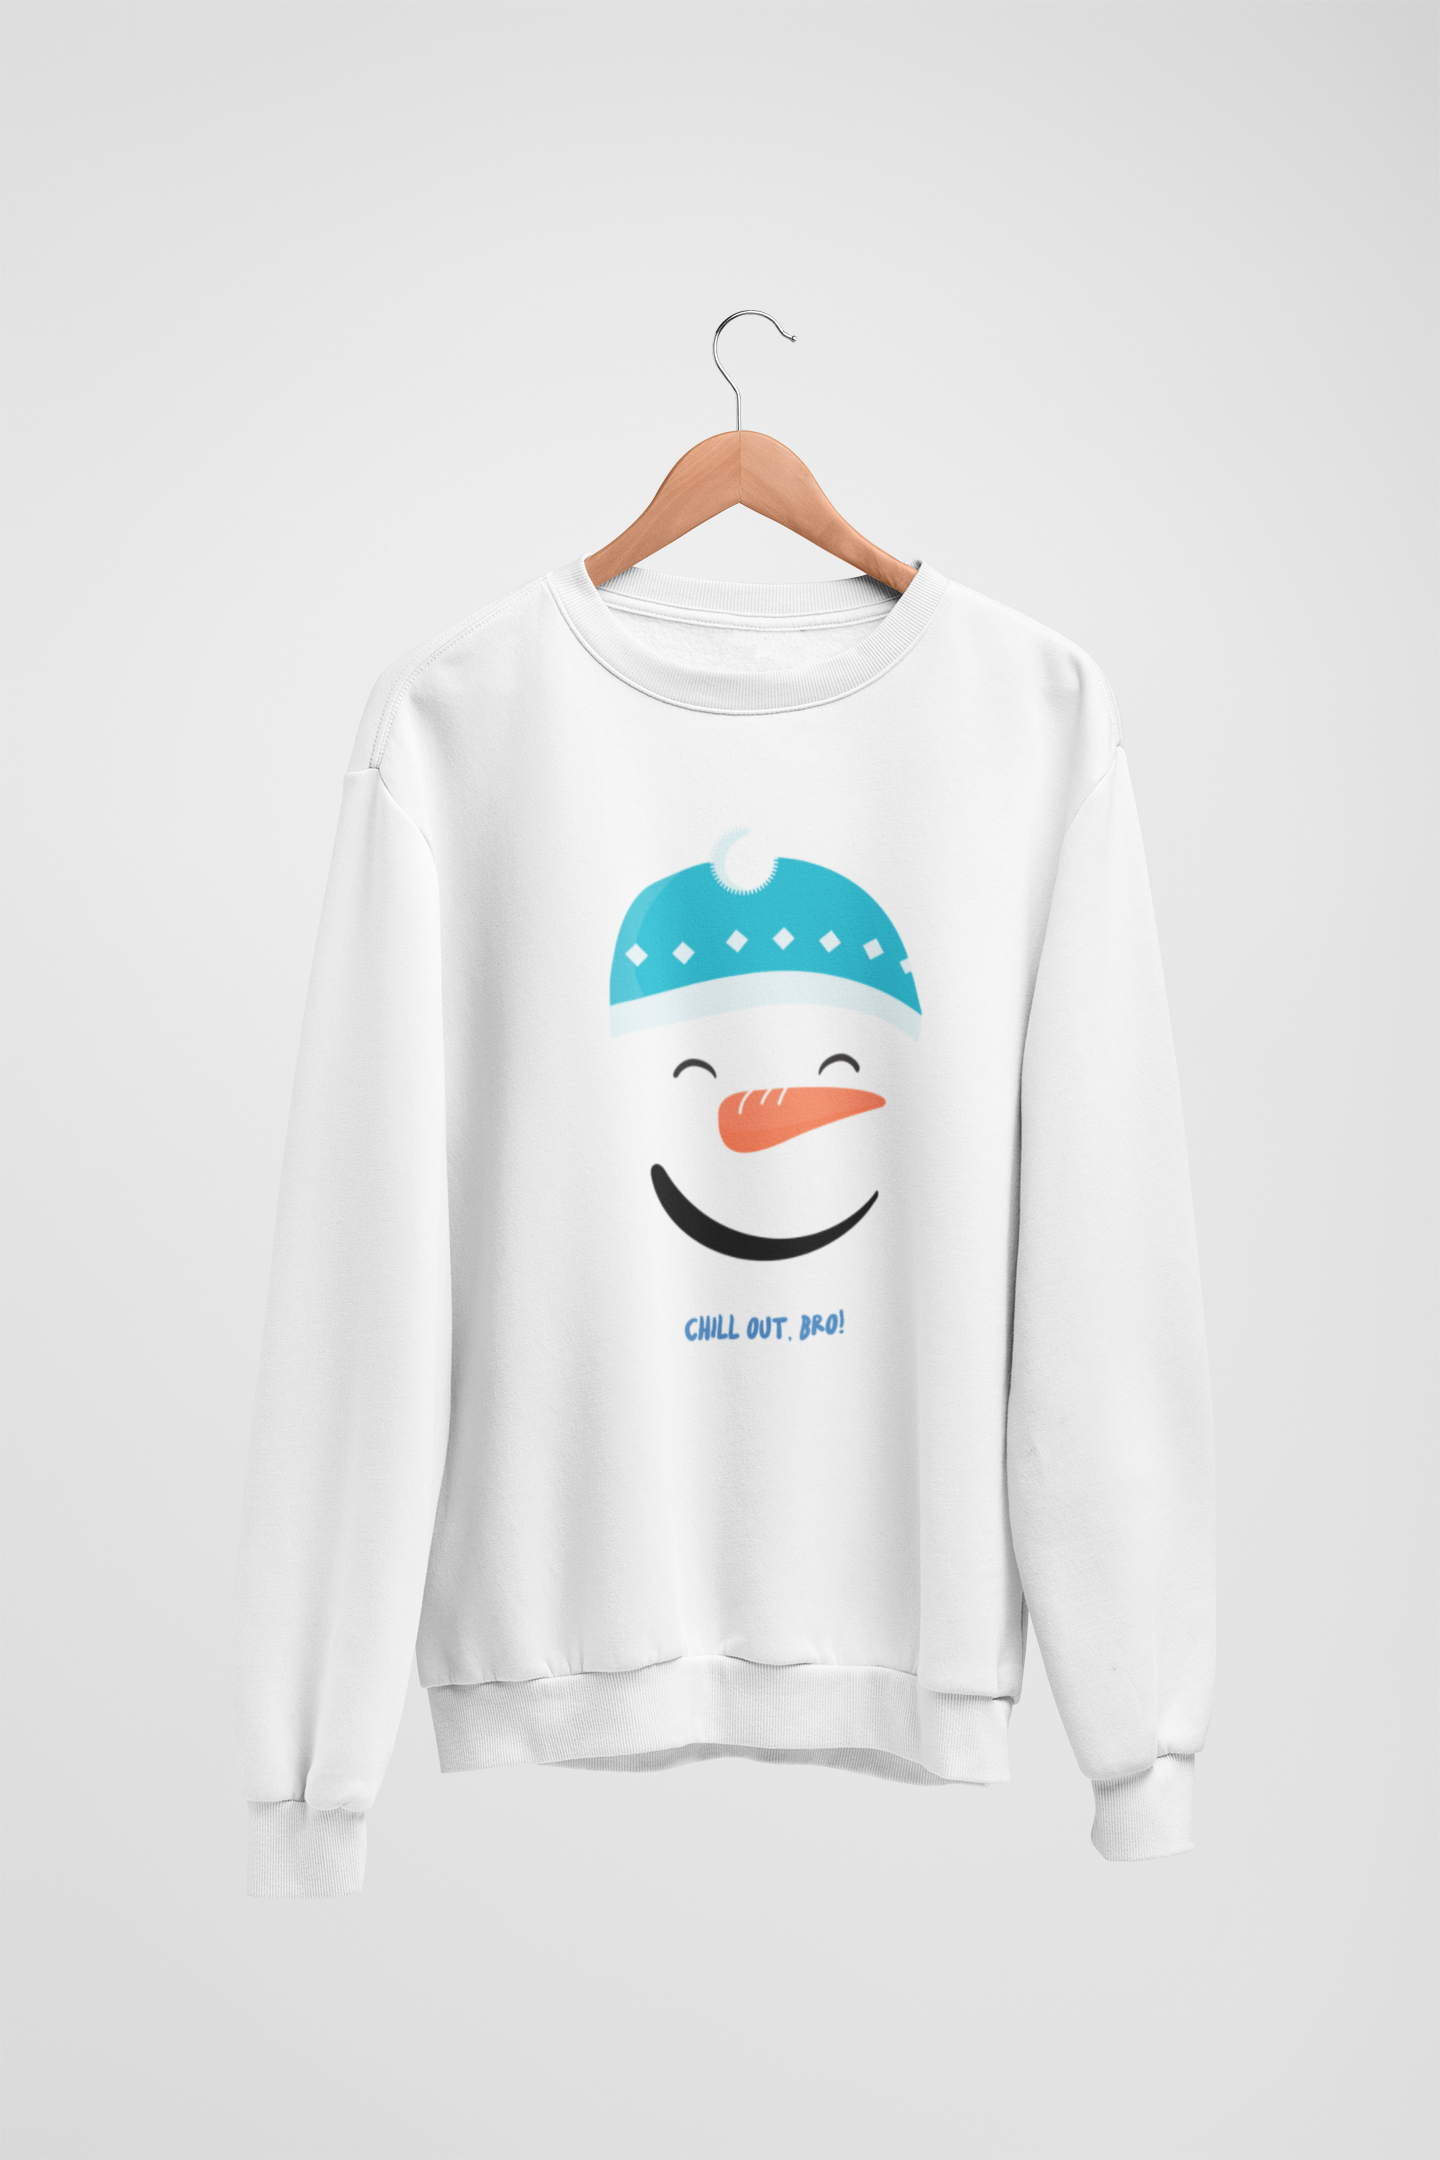 Chill Out Bro White Sweatshirt For Women